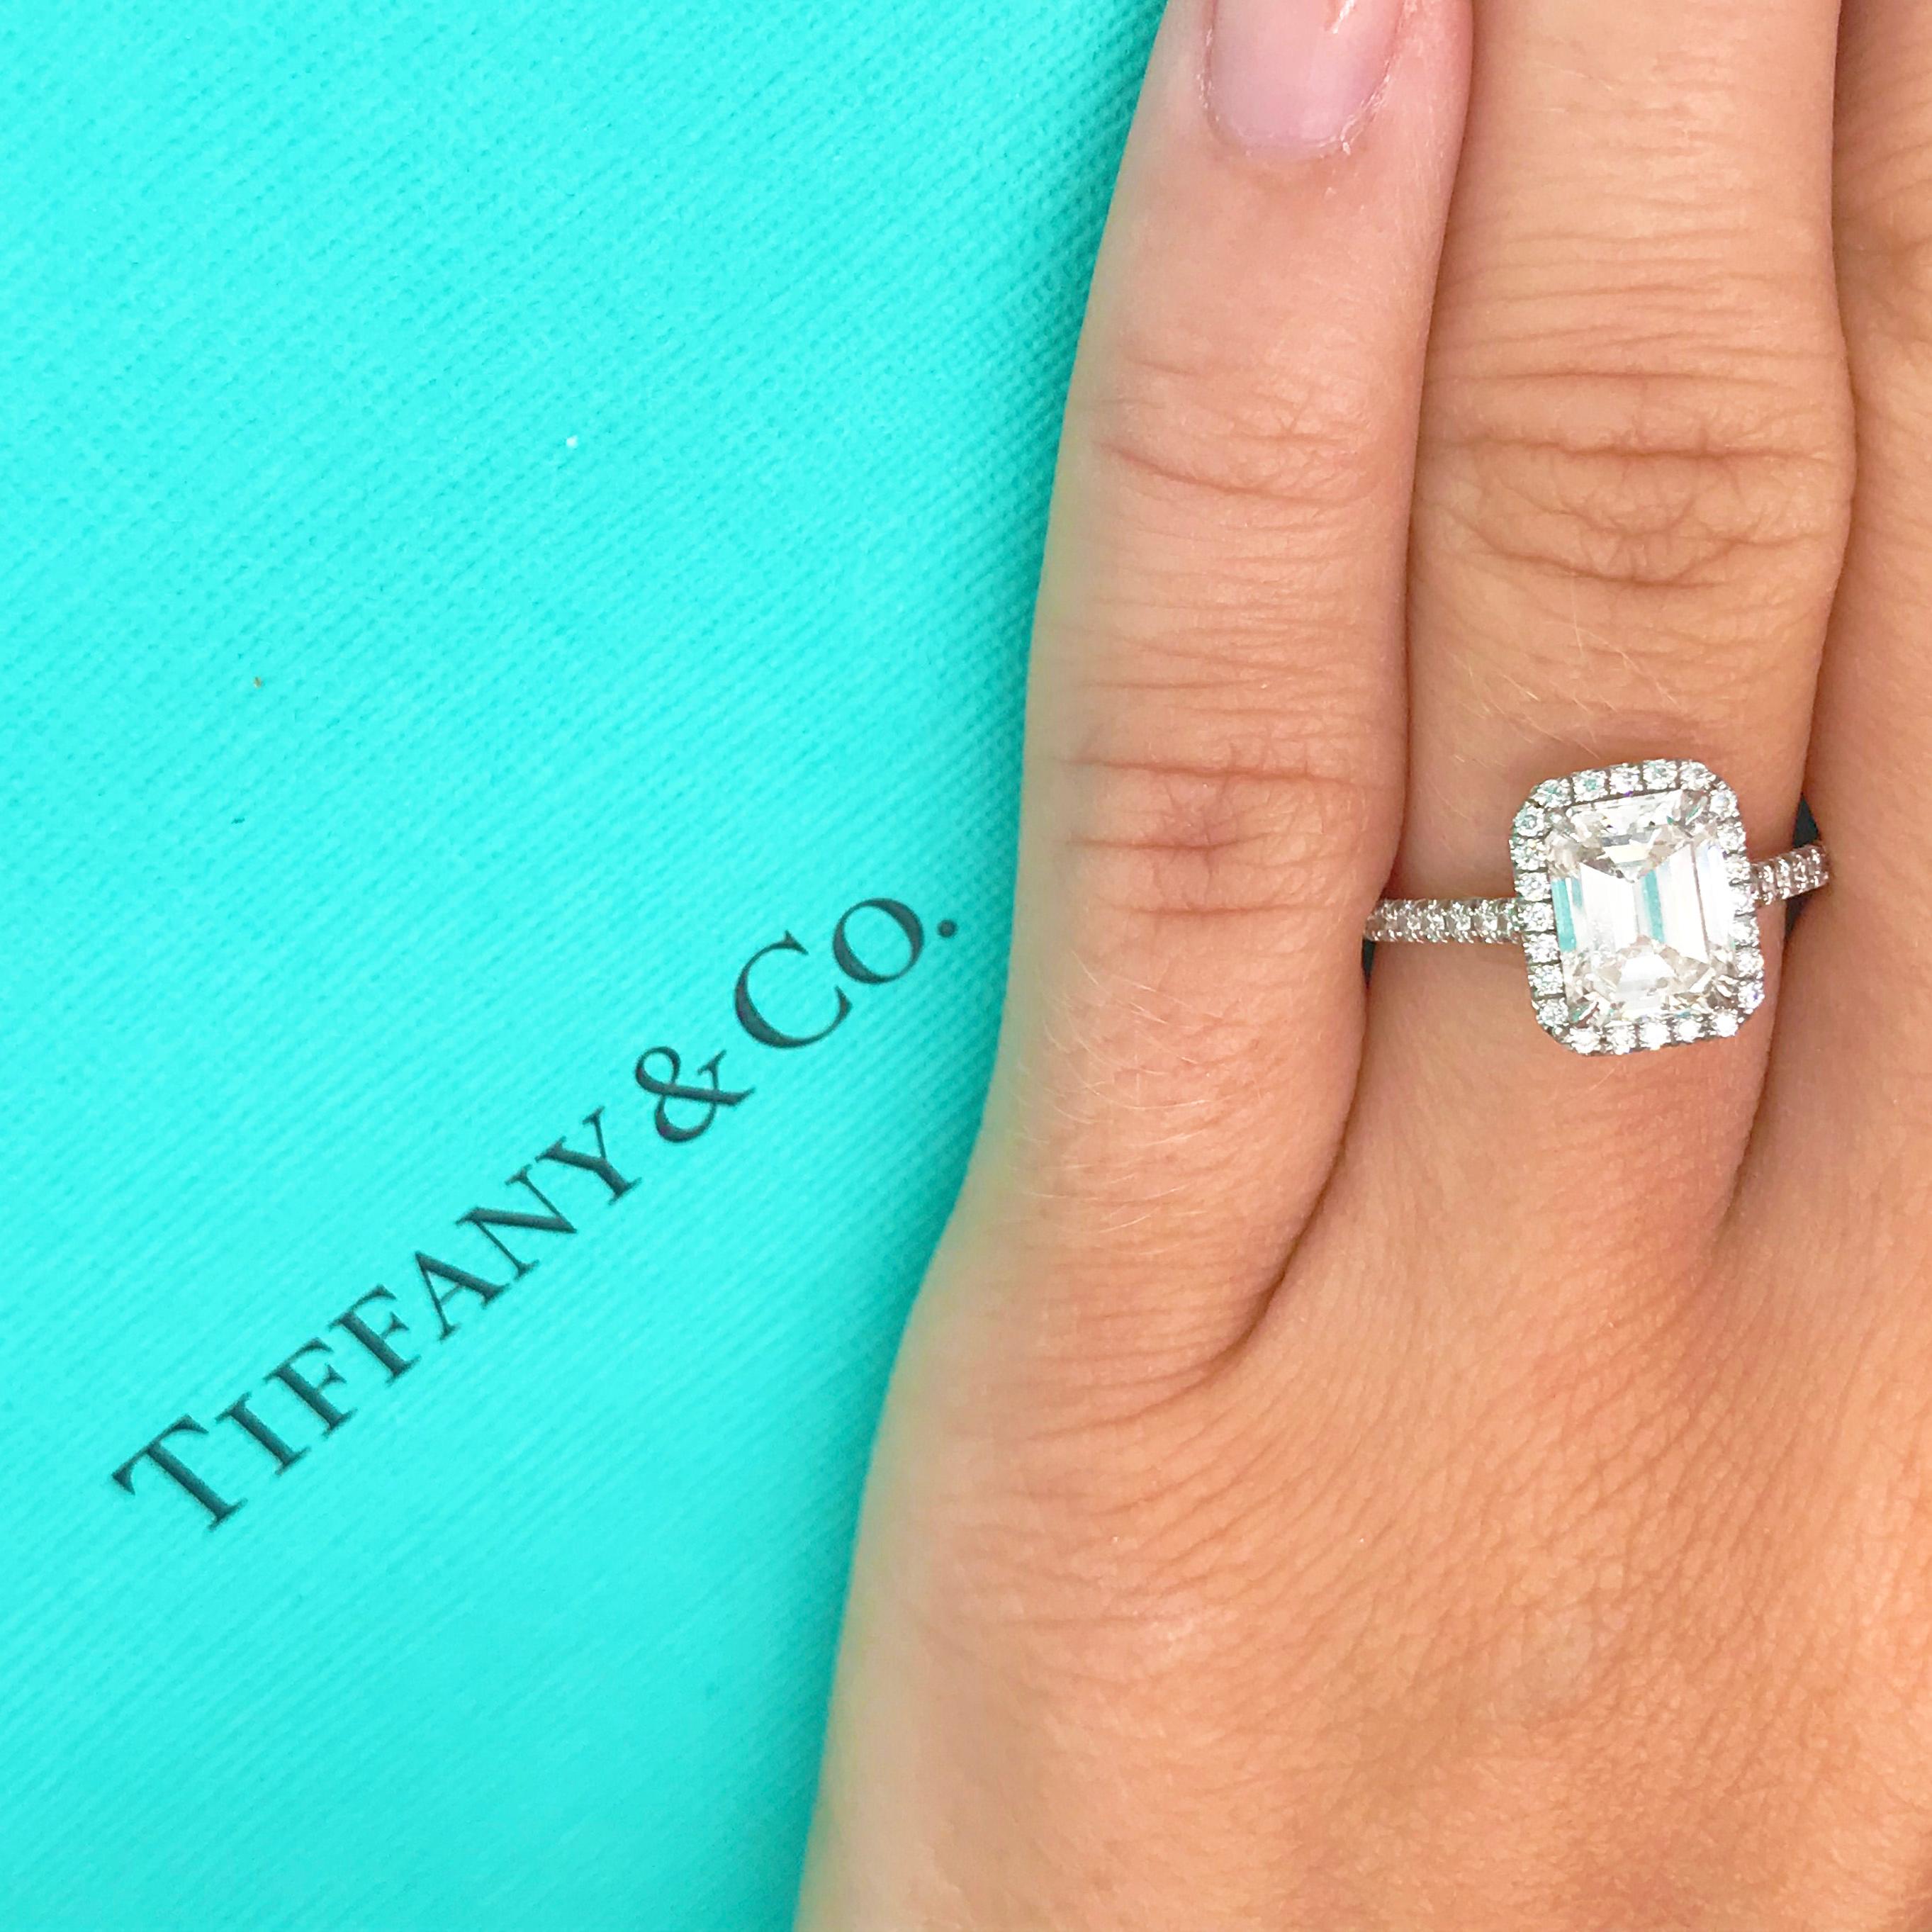 Stunning Tiffany & Co. original diamond ring! This Tiffany & Co. engagement ring has a genuine, natural emerald shape diamond set in a Tiffany & Co. four prong setting. This diamond comes with the original Tiffany & Co. diamond certificate and the